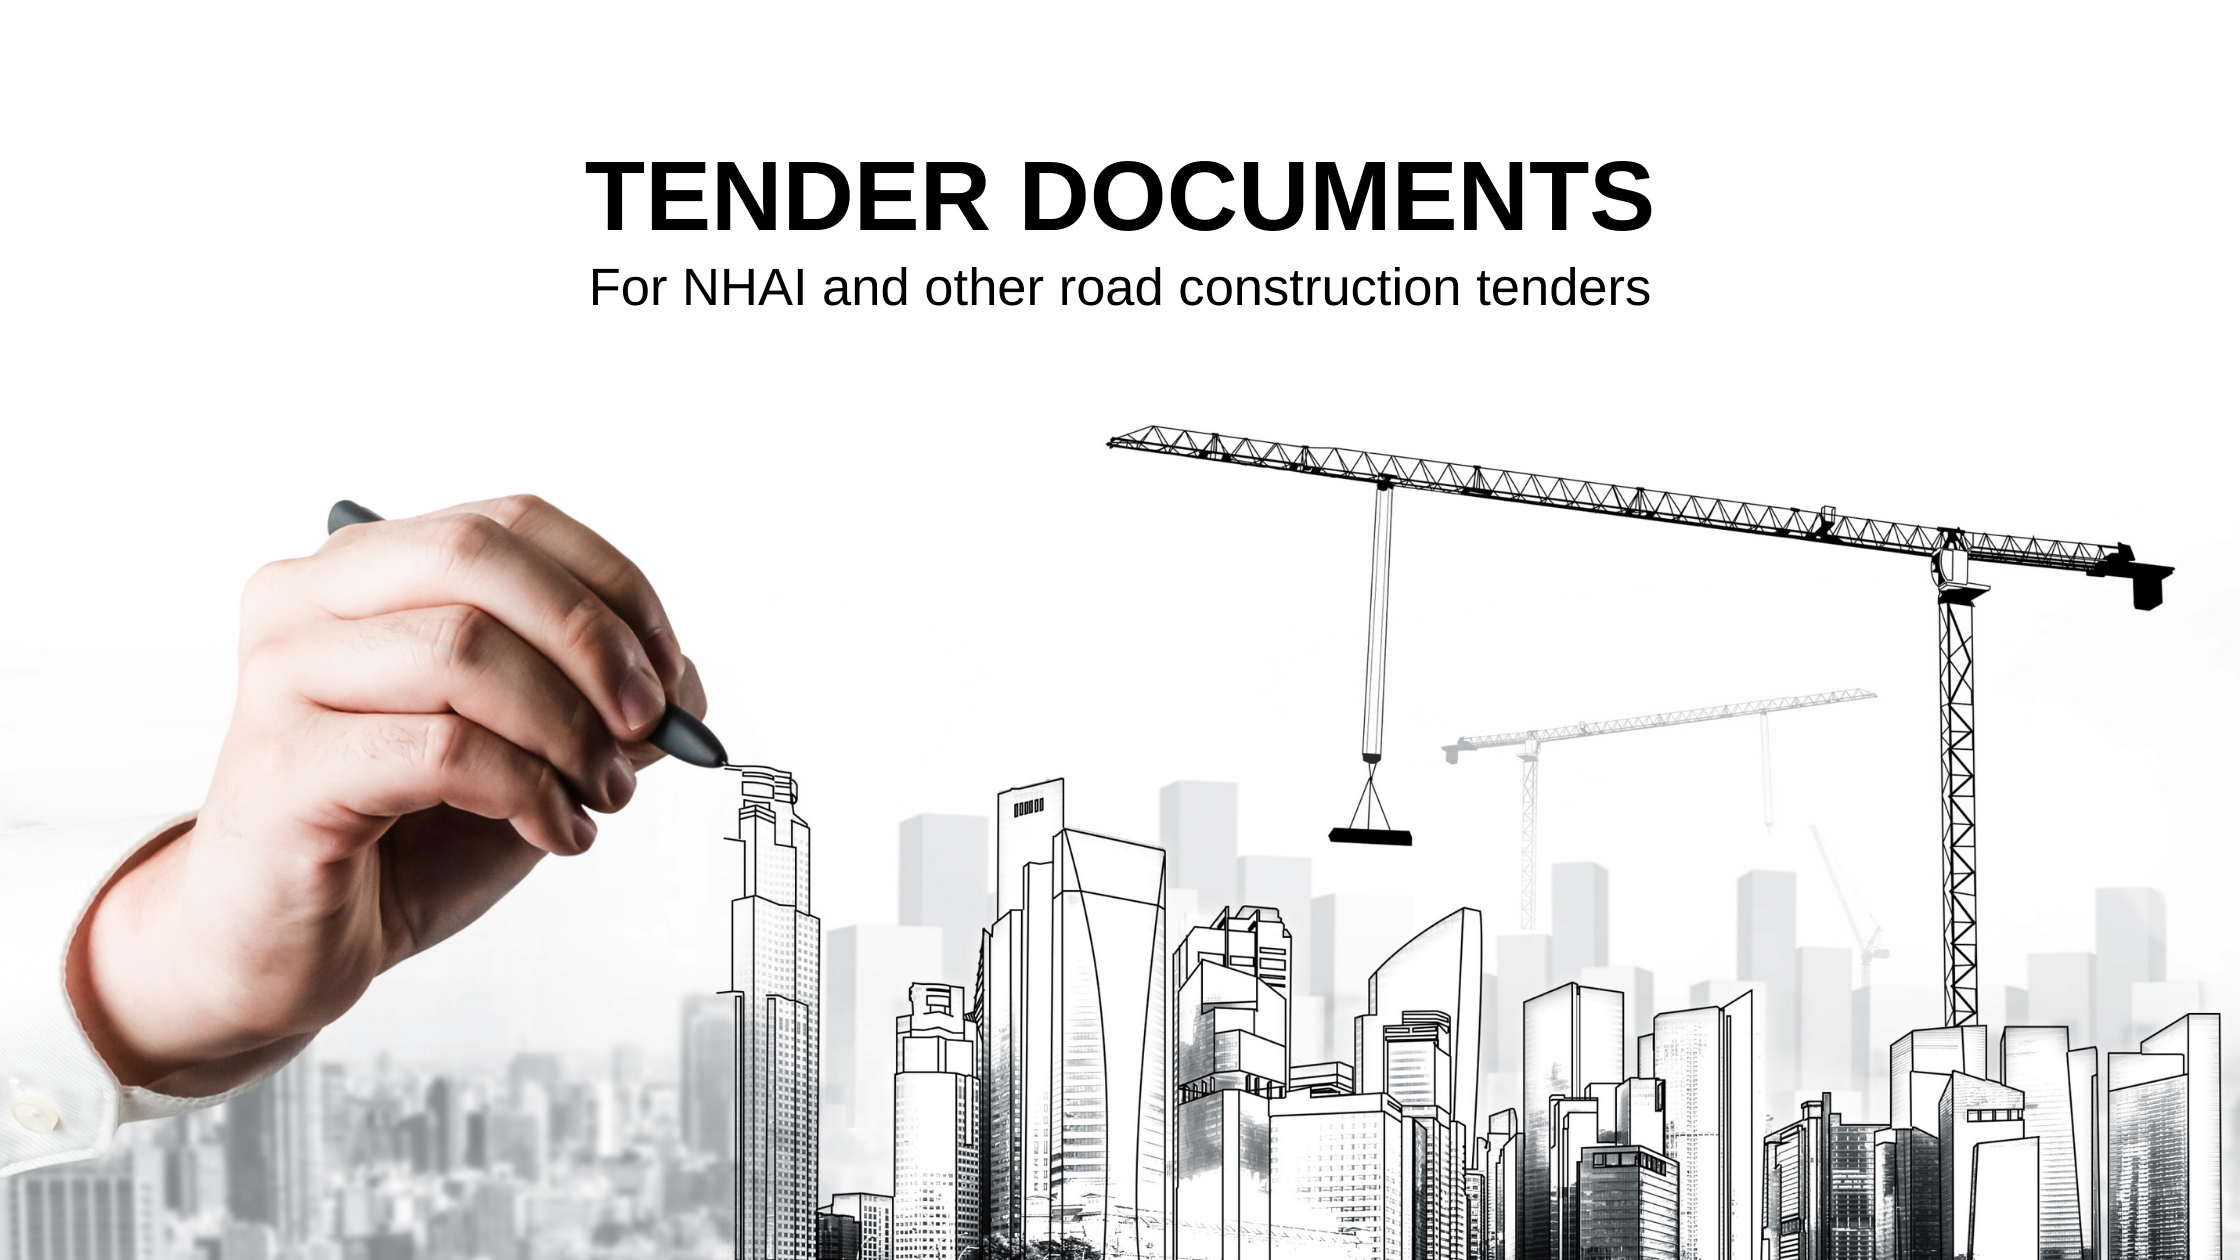 Construction image with tender documents or NHAI and road construction tenders as its heading